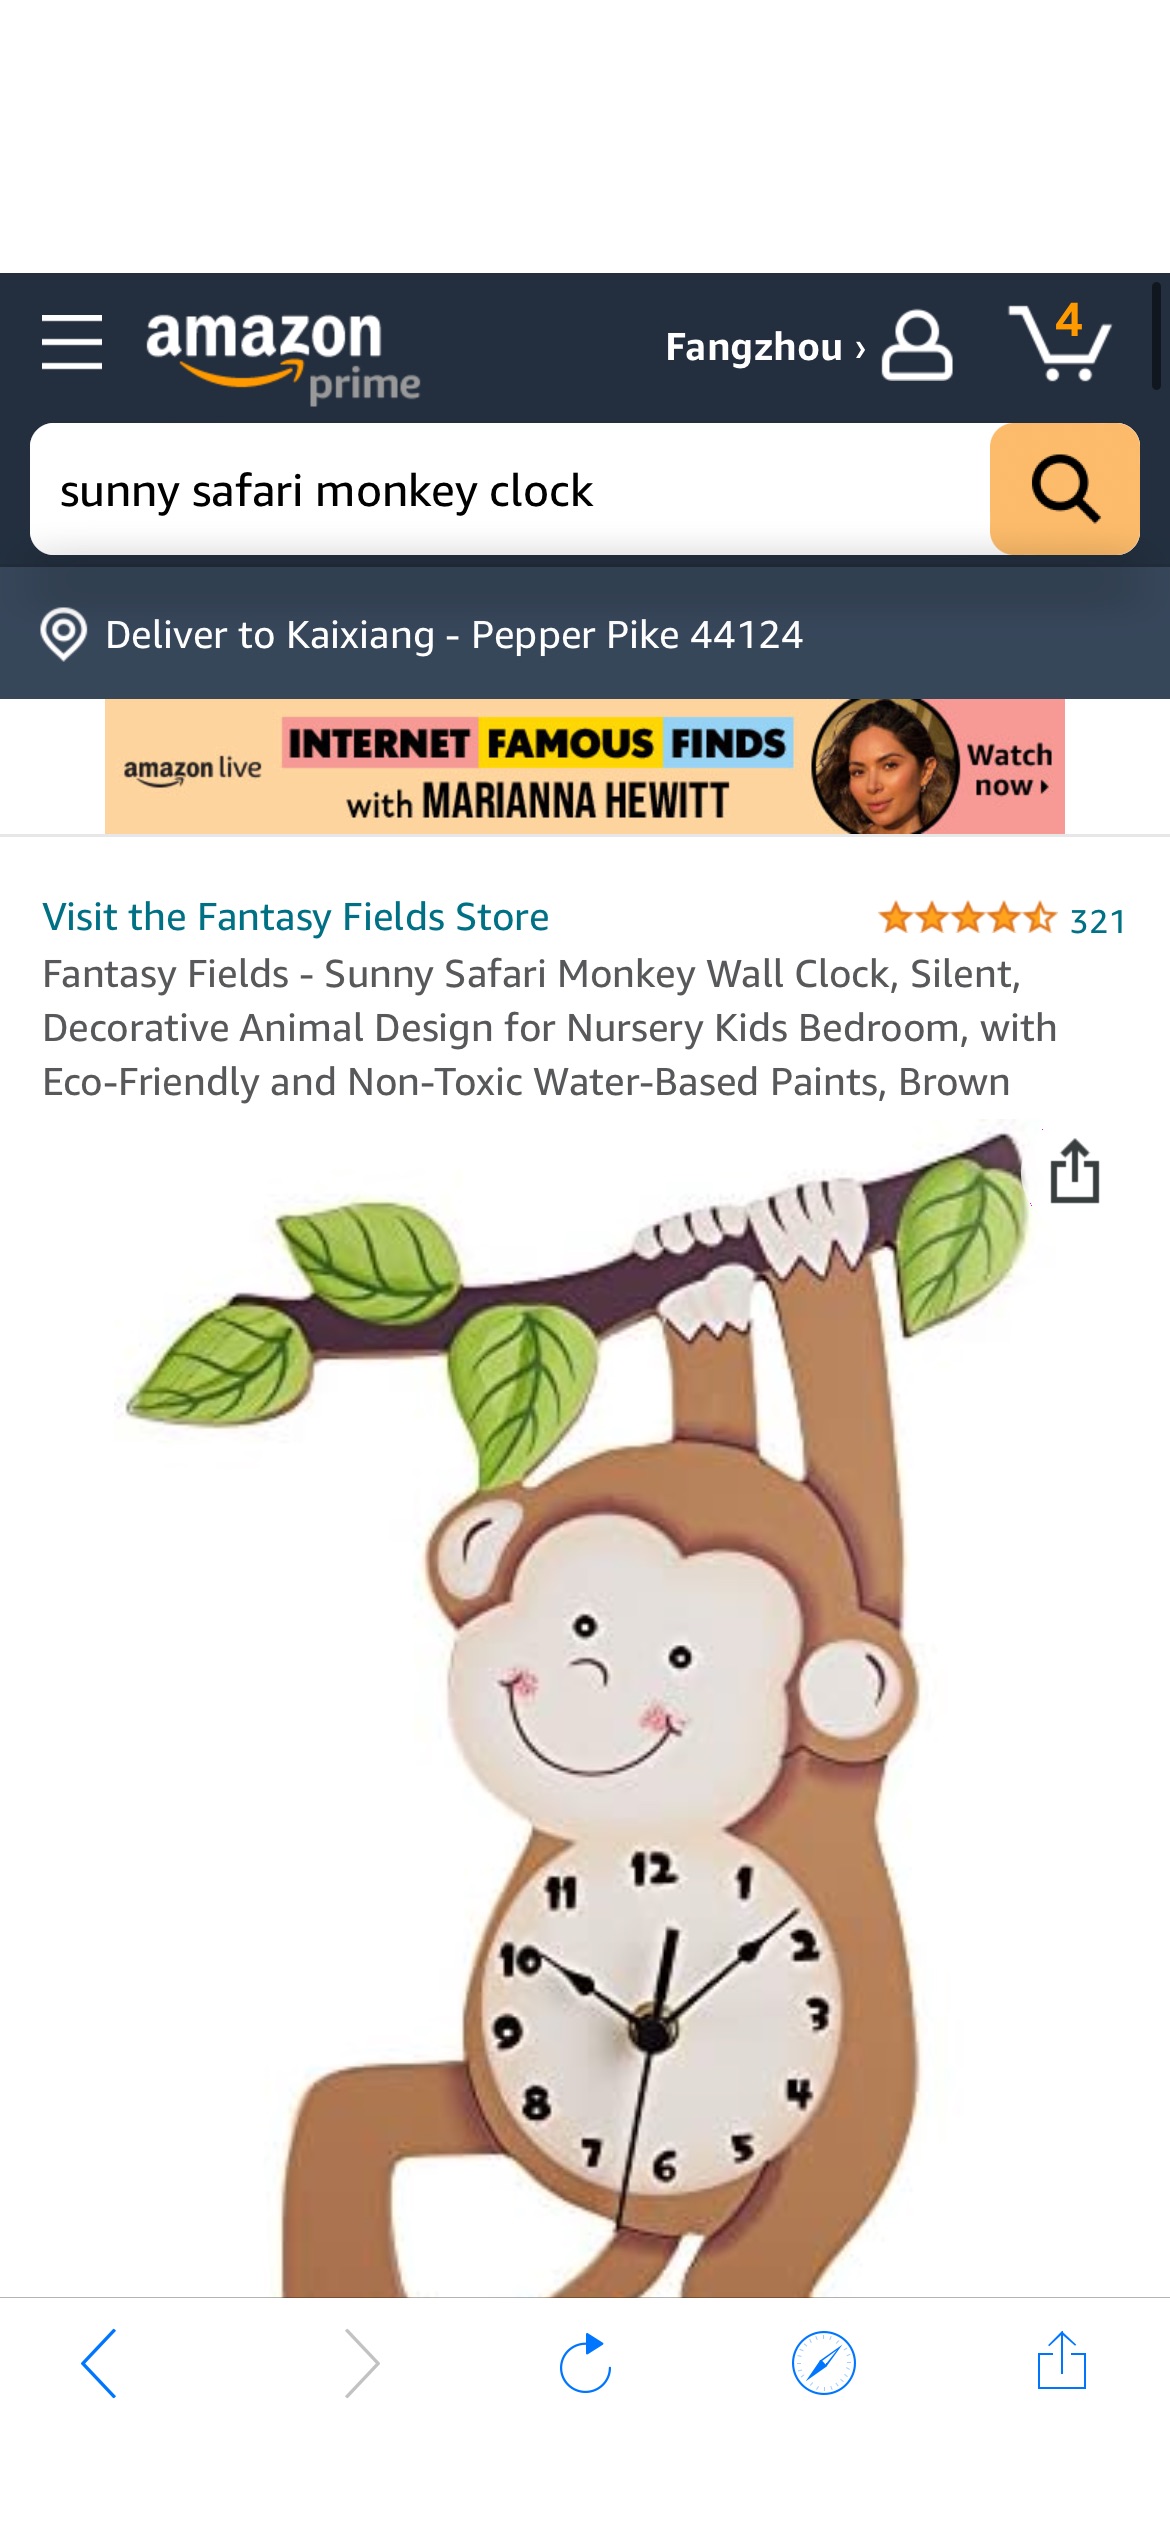 Amazon.com: Fantasy Fields - Sunny Safari Monkey Wall Clock, Silent, Decorative Animal Design for Nursery Kids Bedroom, with Eco-Friendly and Non-Toxic Water-Based Paints, Brown : Home & Kitchen